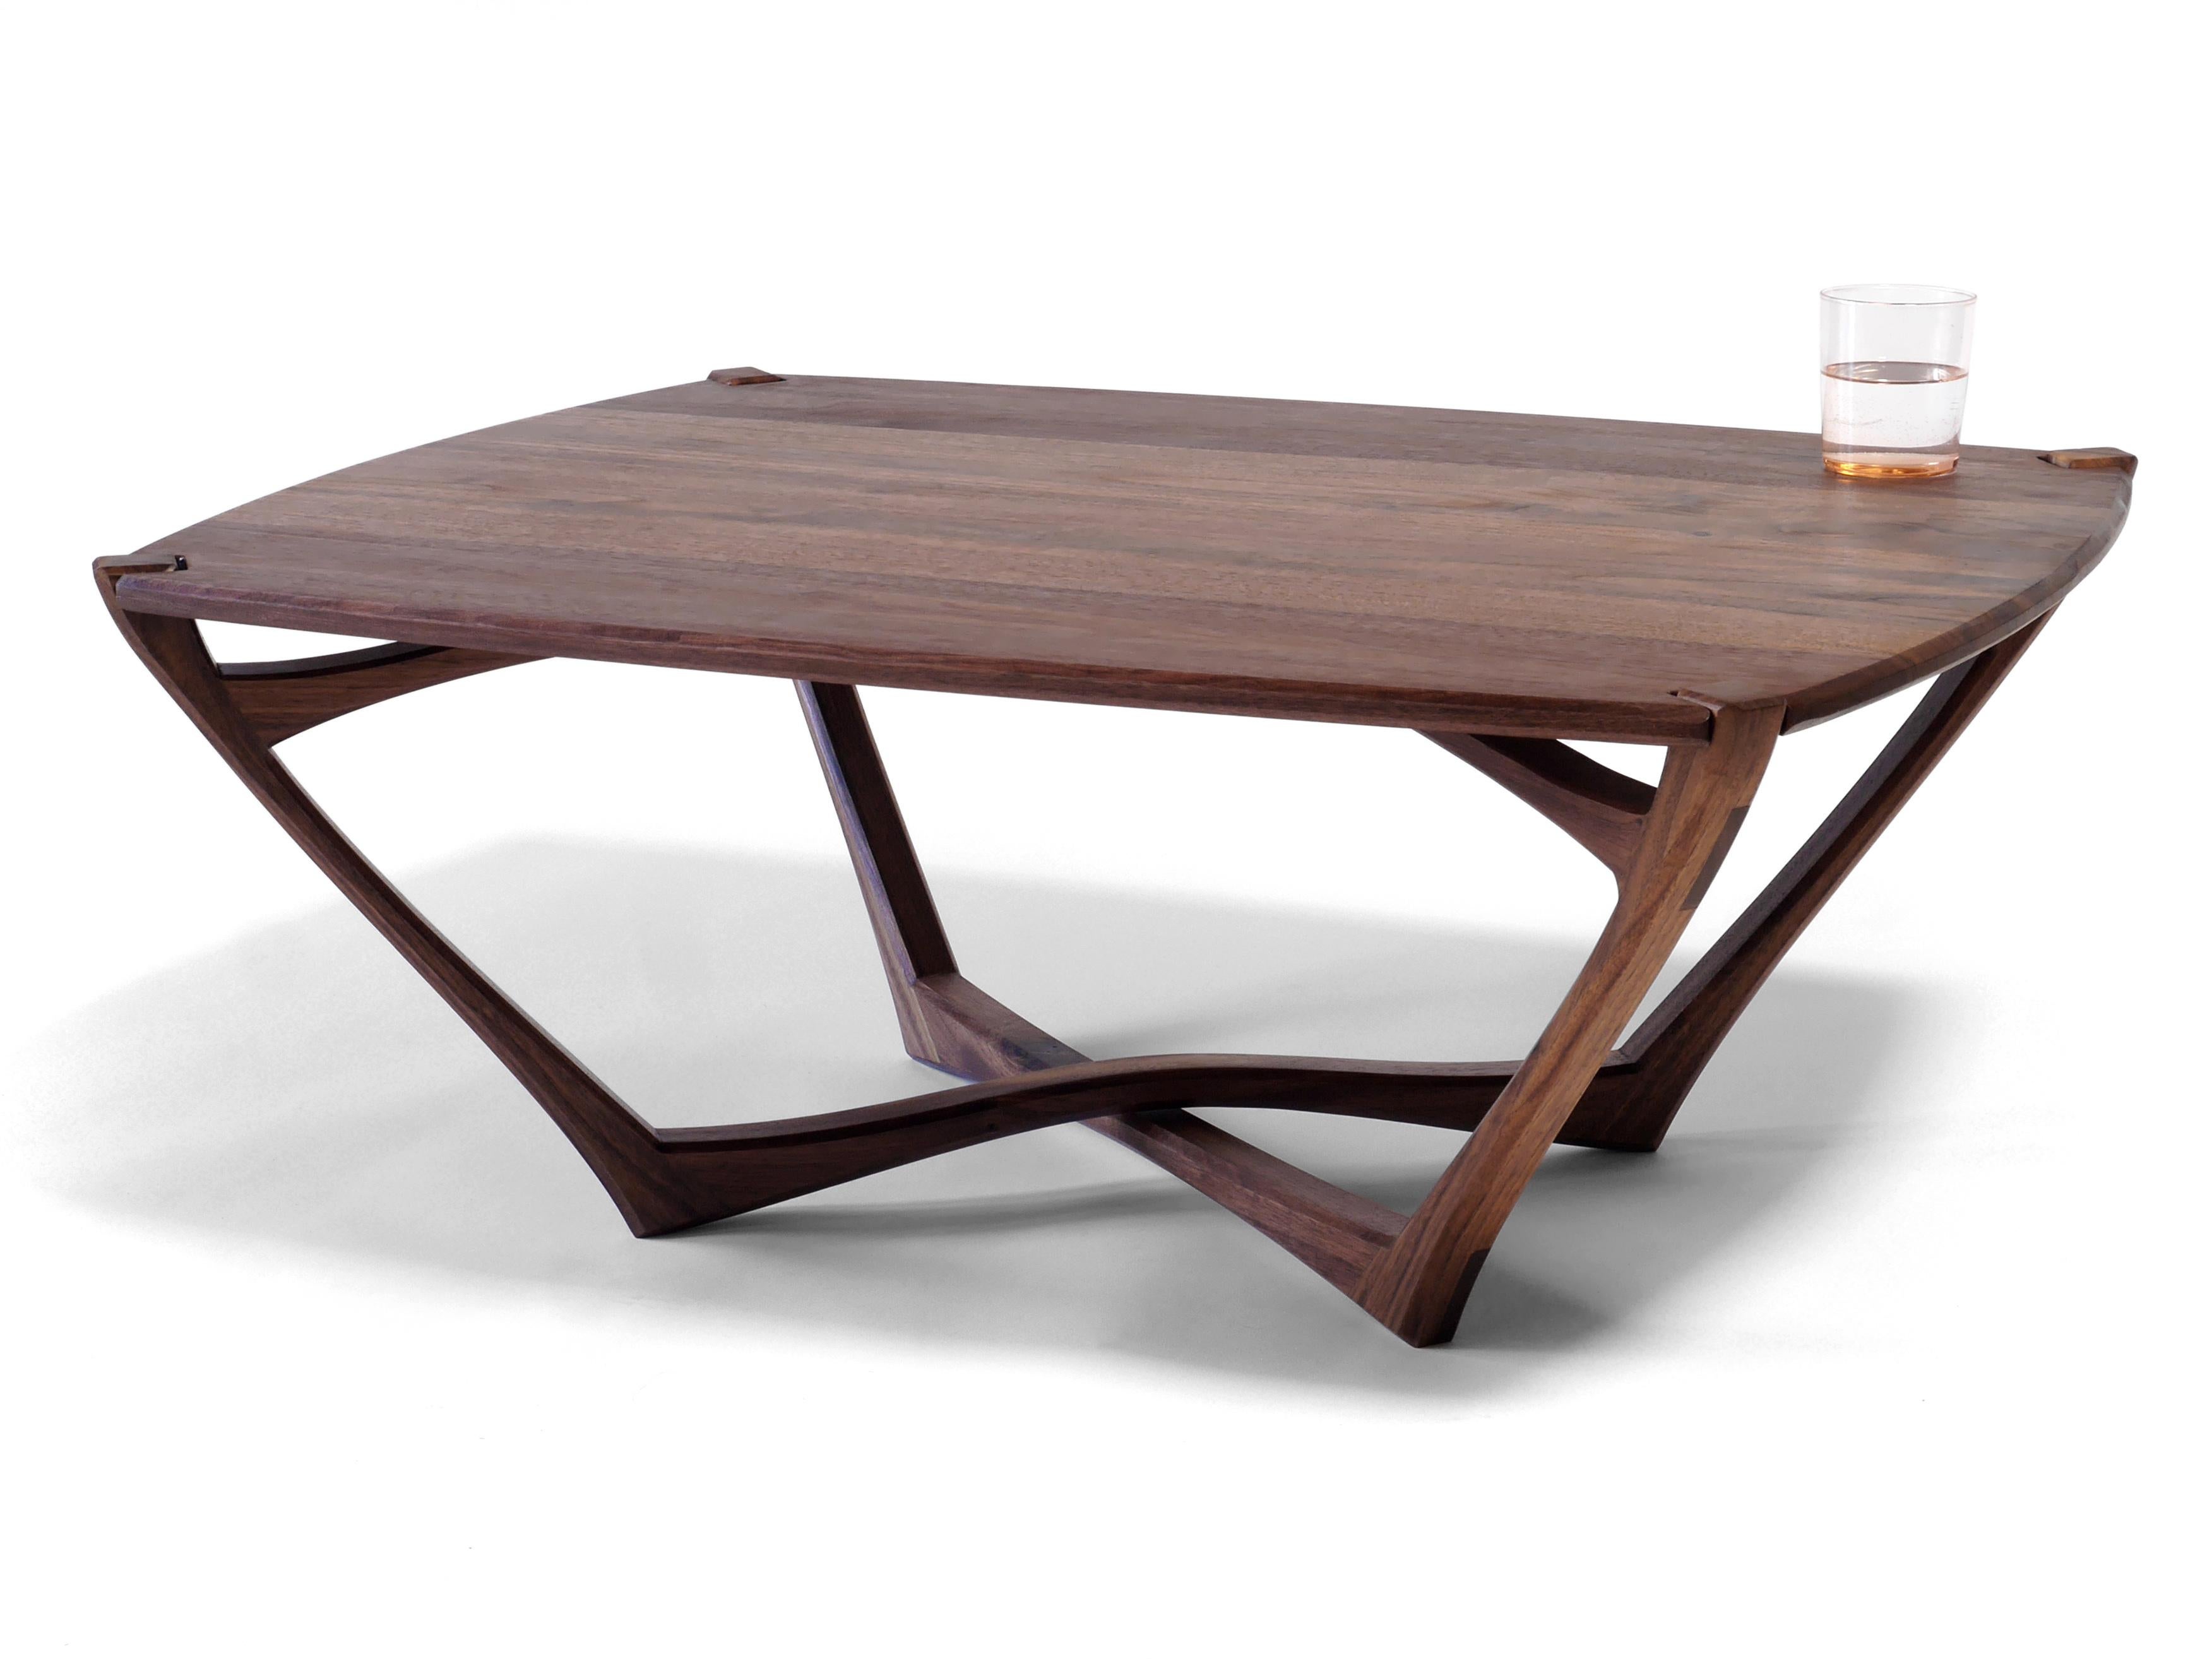 Contemporary Walnut Mistral Coffee Table, Modern Sculptural Living Room Table by Arid For Sale